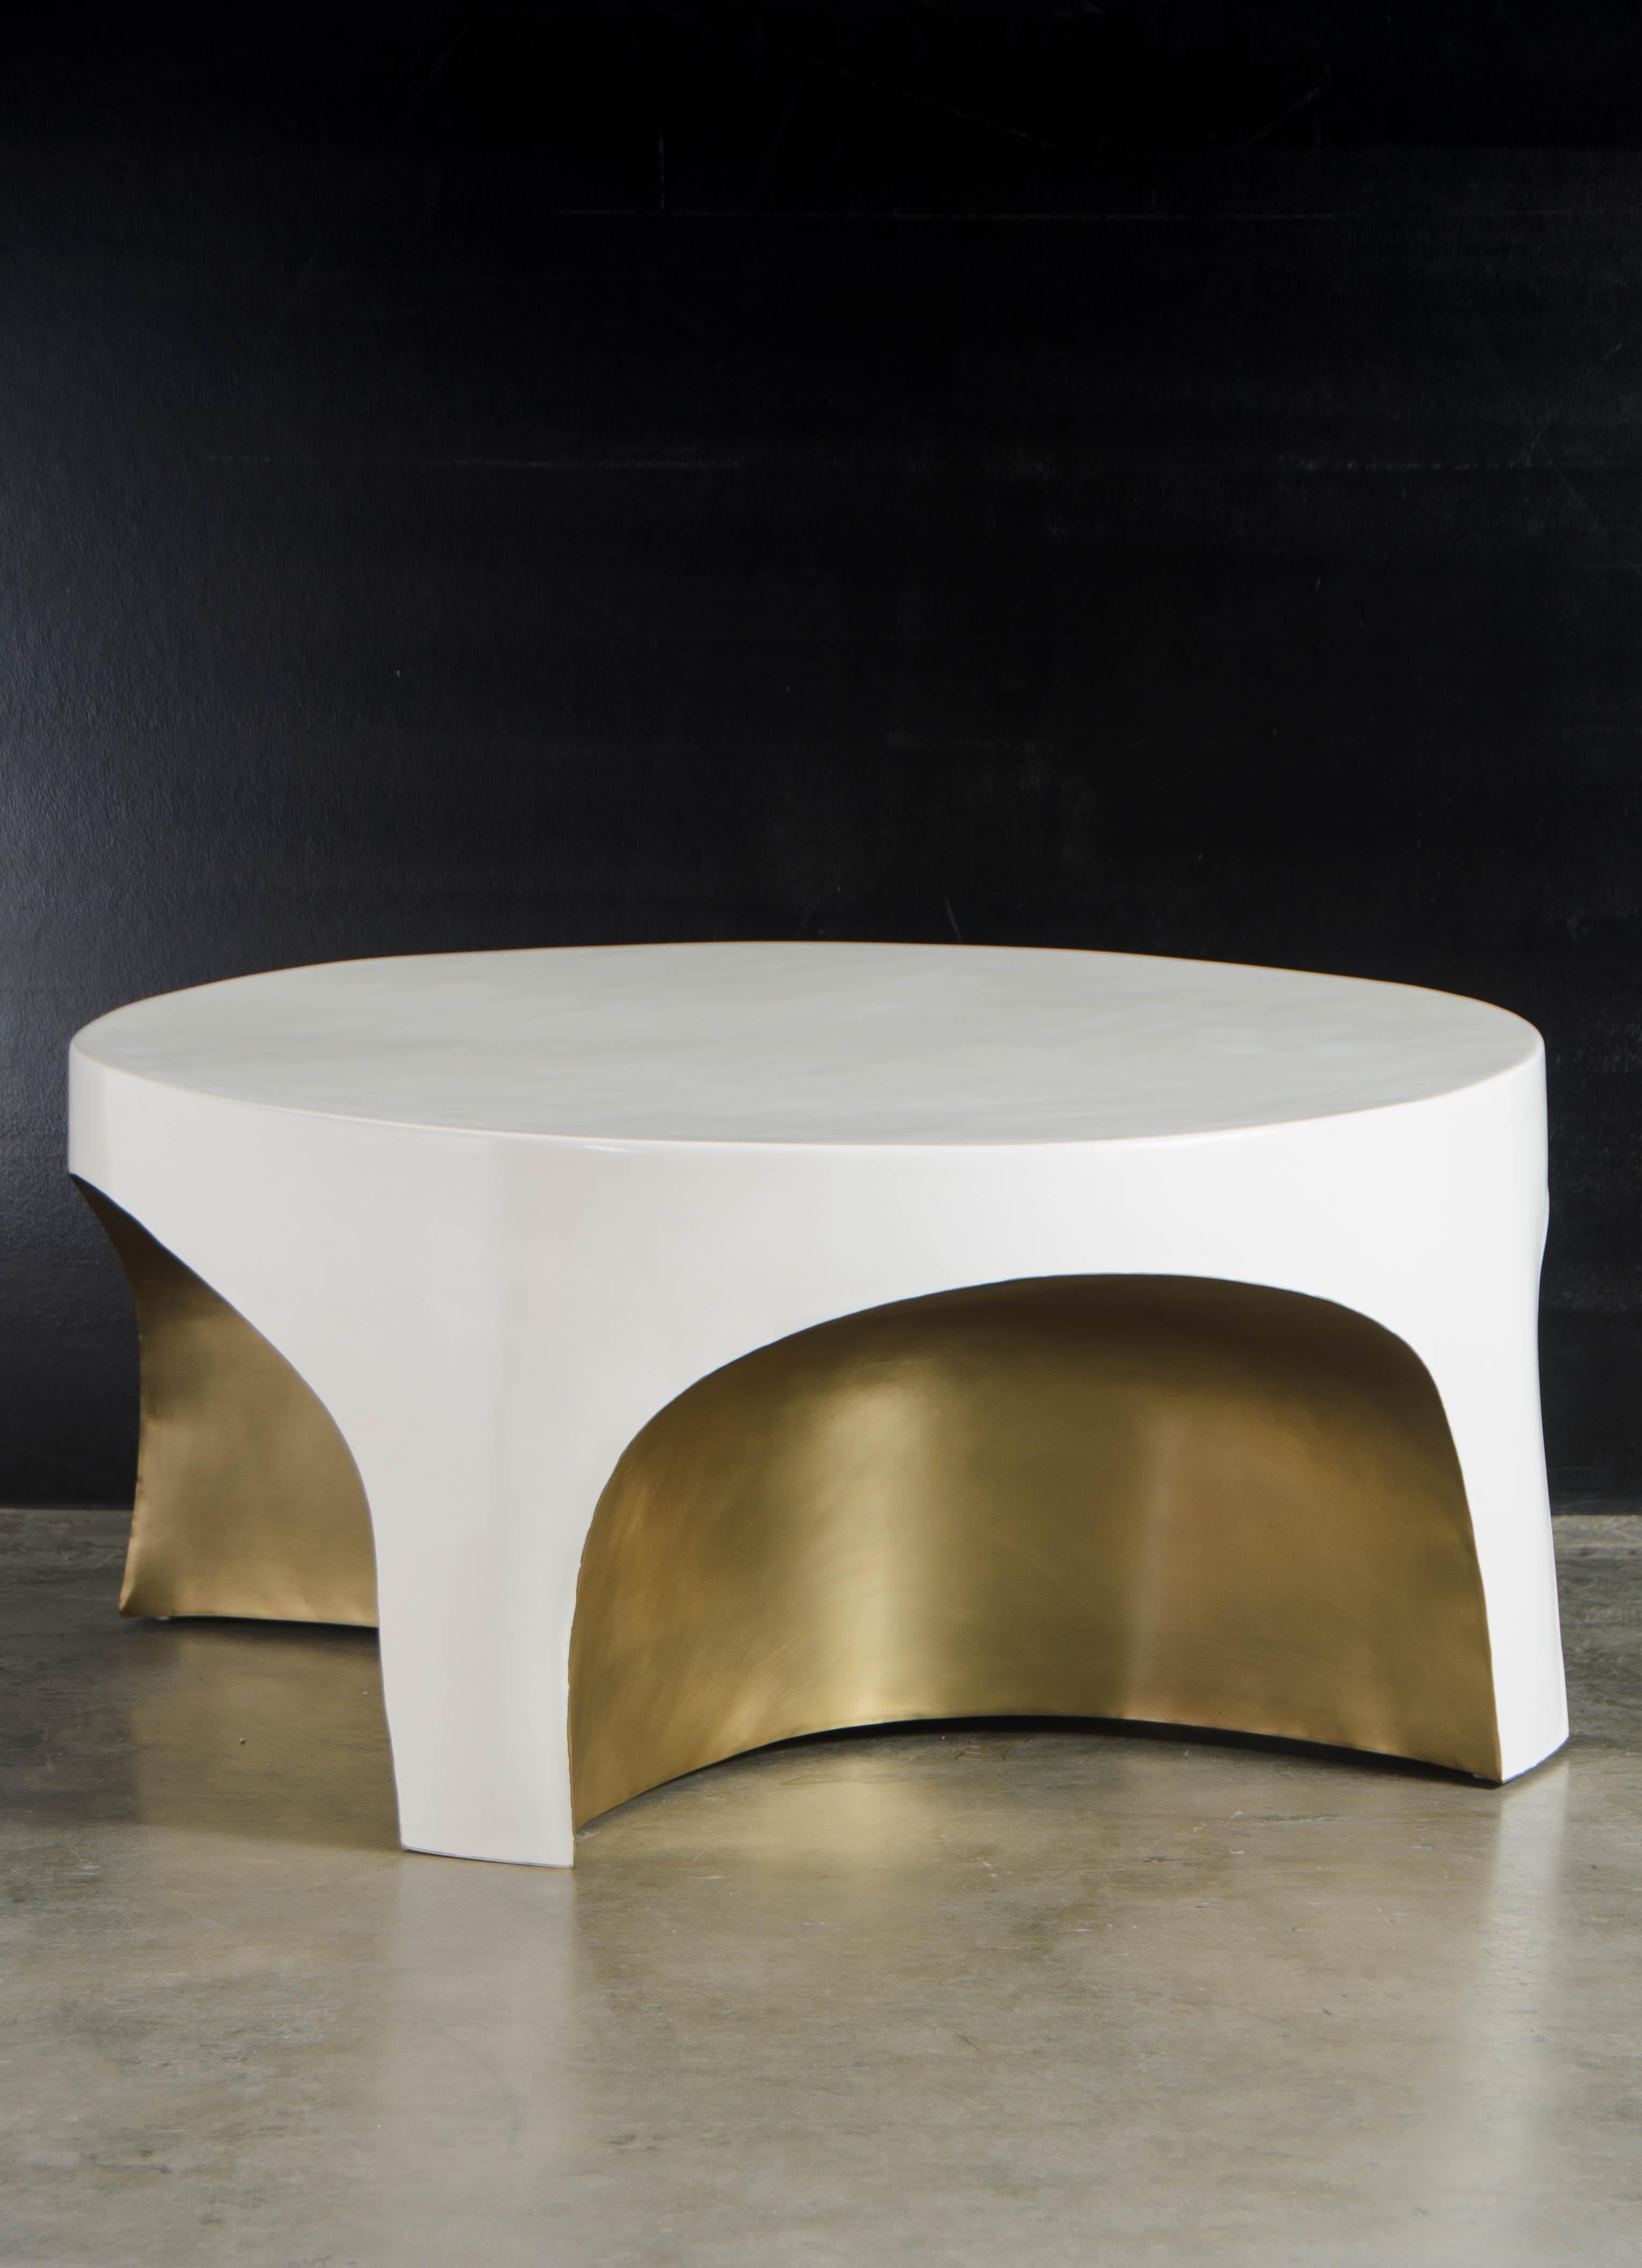 Modern Contemporary Brass Rimmed Curved Table w/ Cream Lacquer by Robert Kuo For Sale